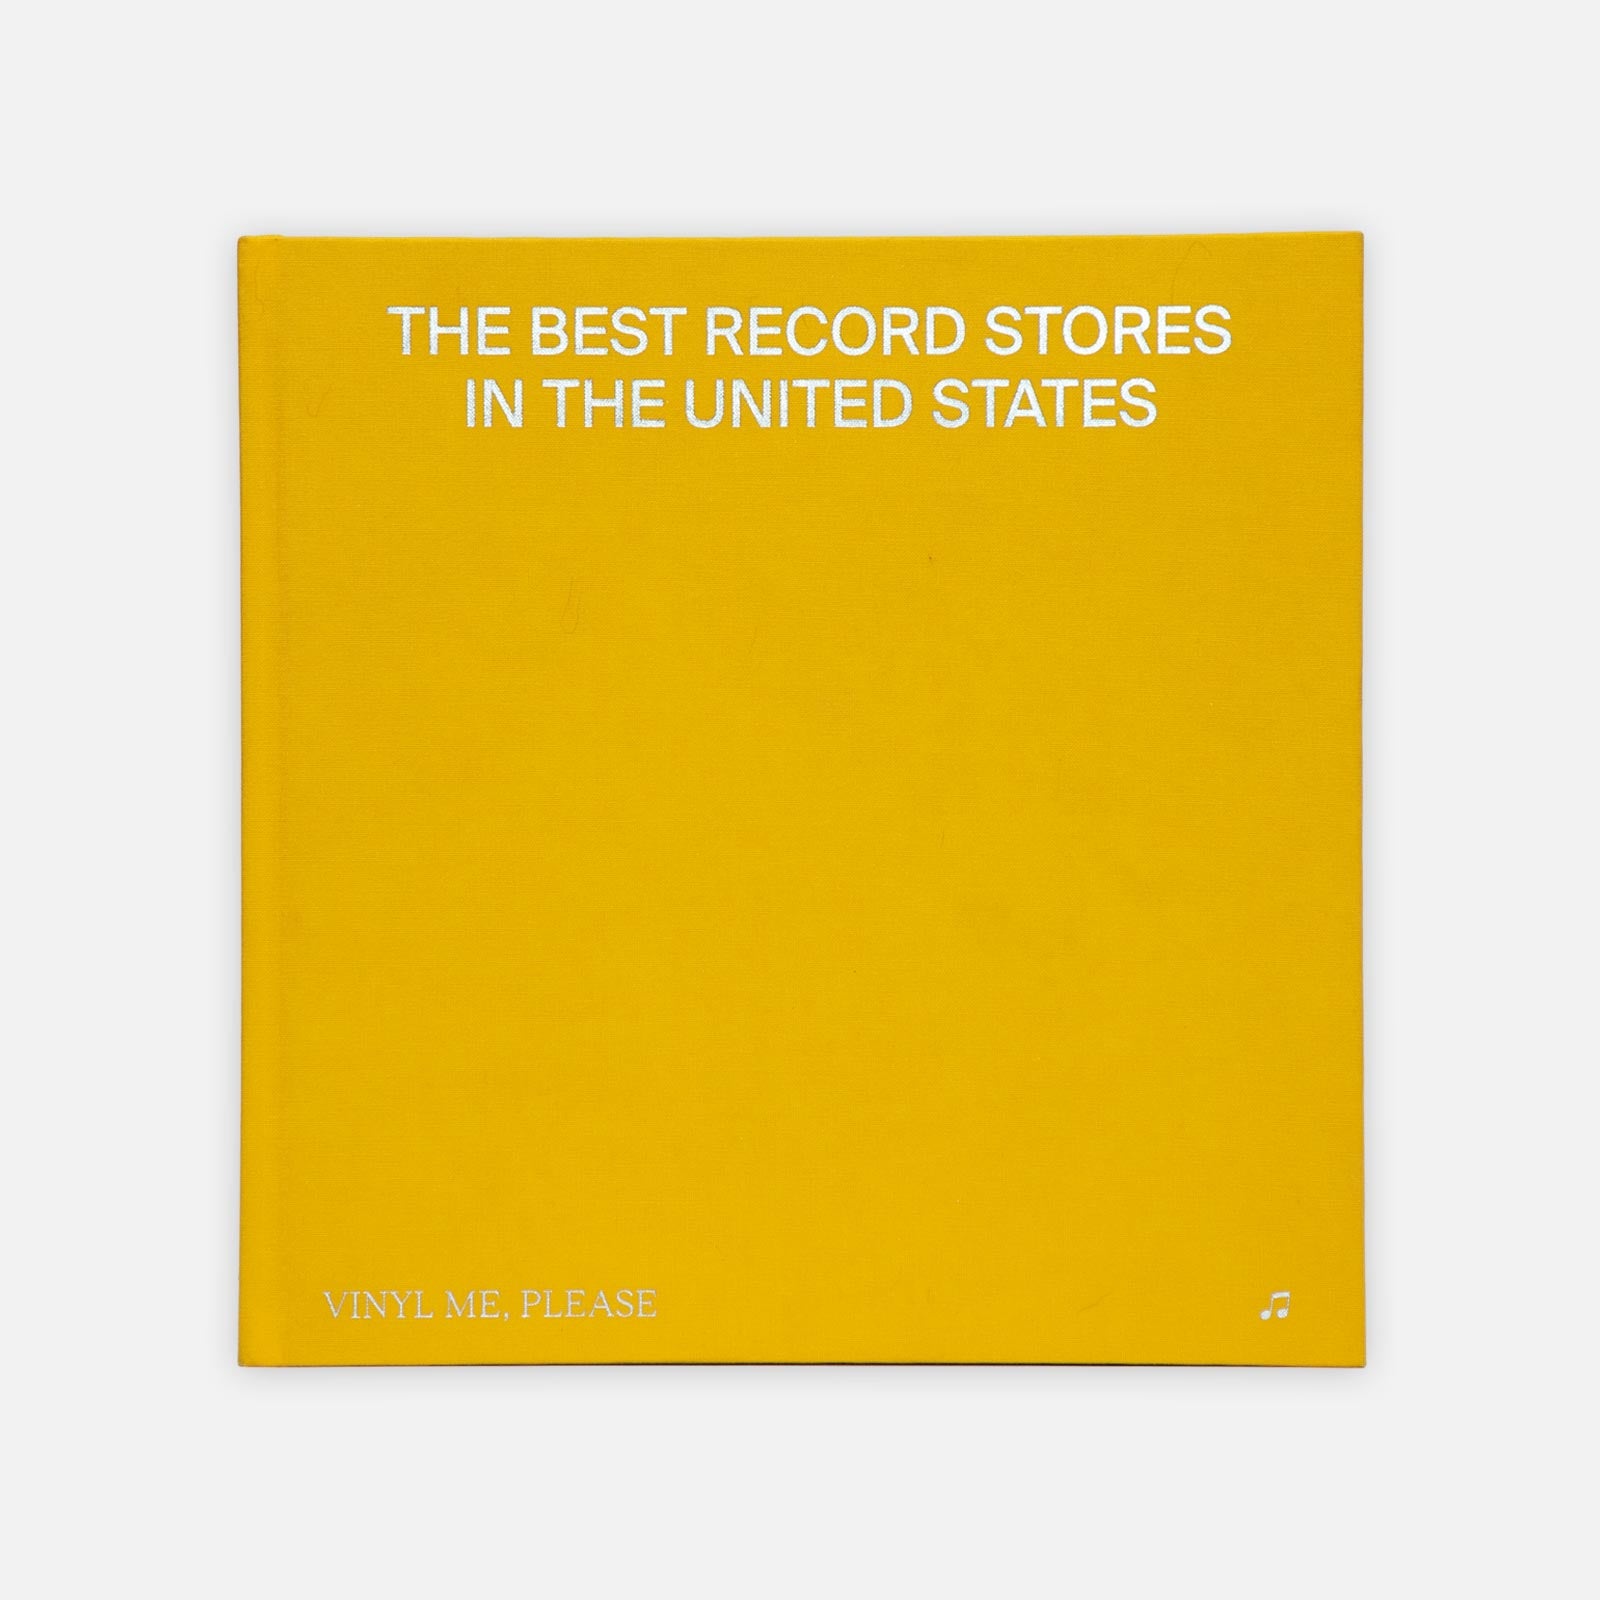 The Best Record Stores In The United States